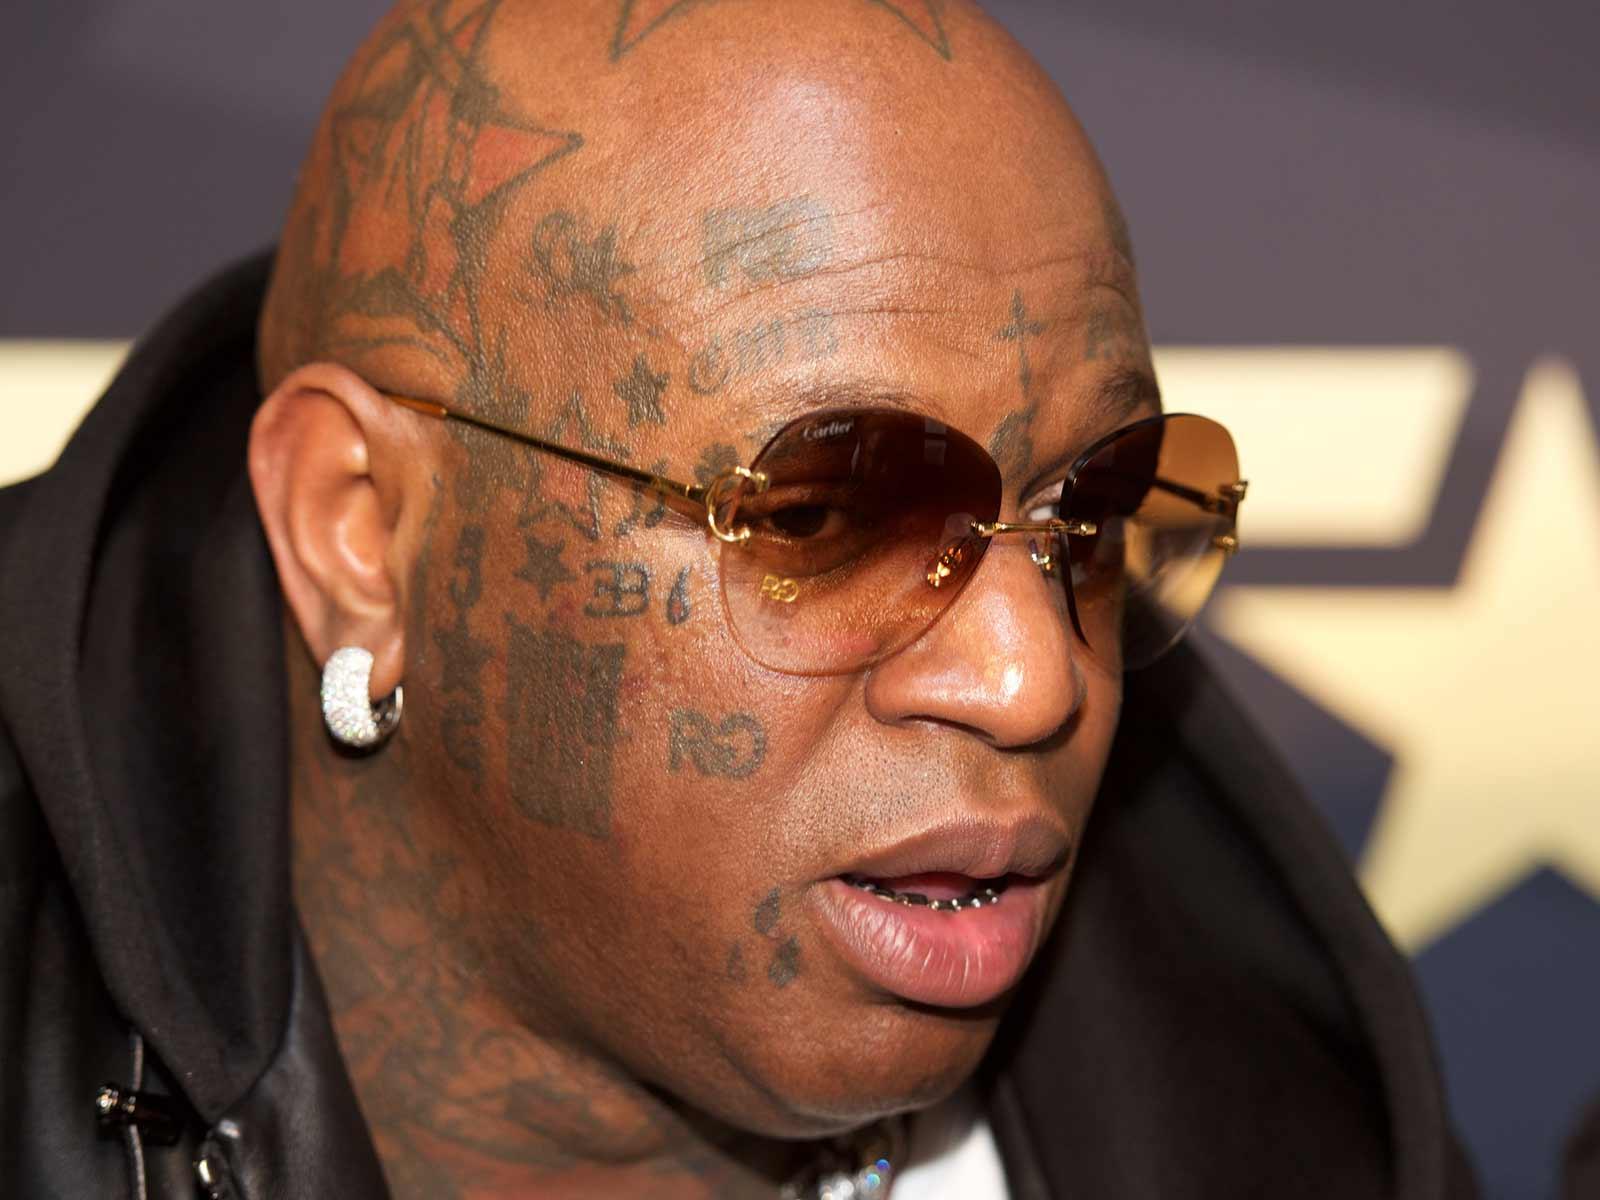 Birdman Pleads for Return of Personal Items and Memorabilia Seized During Foreclosure